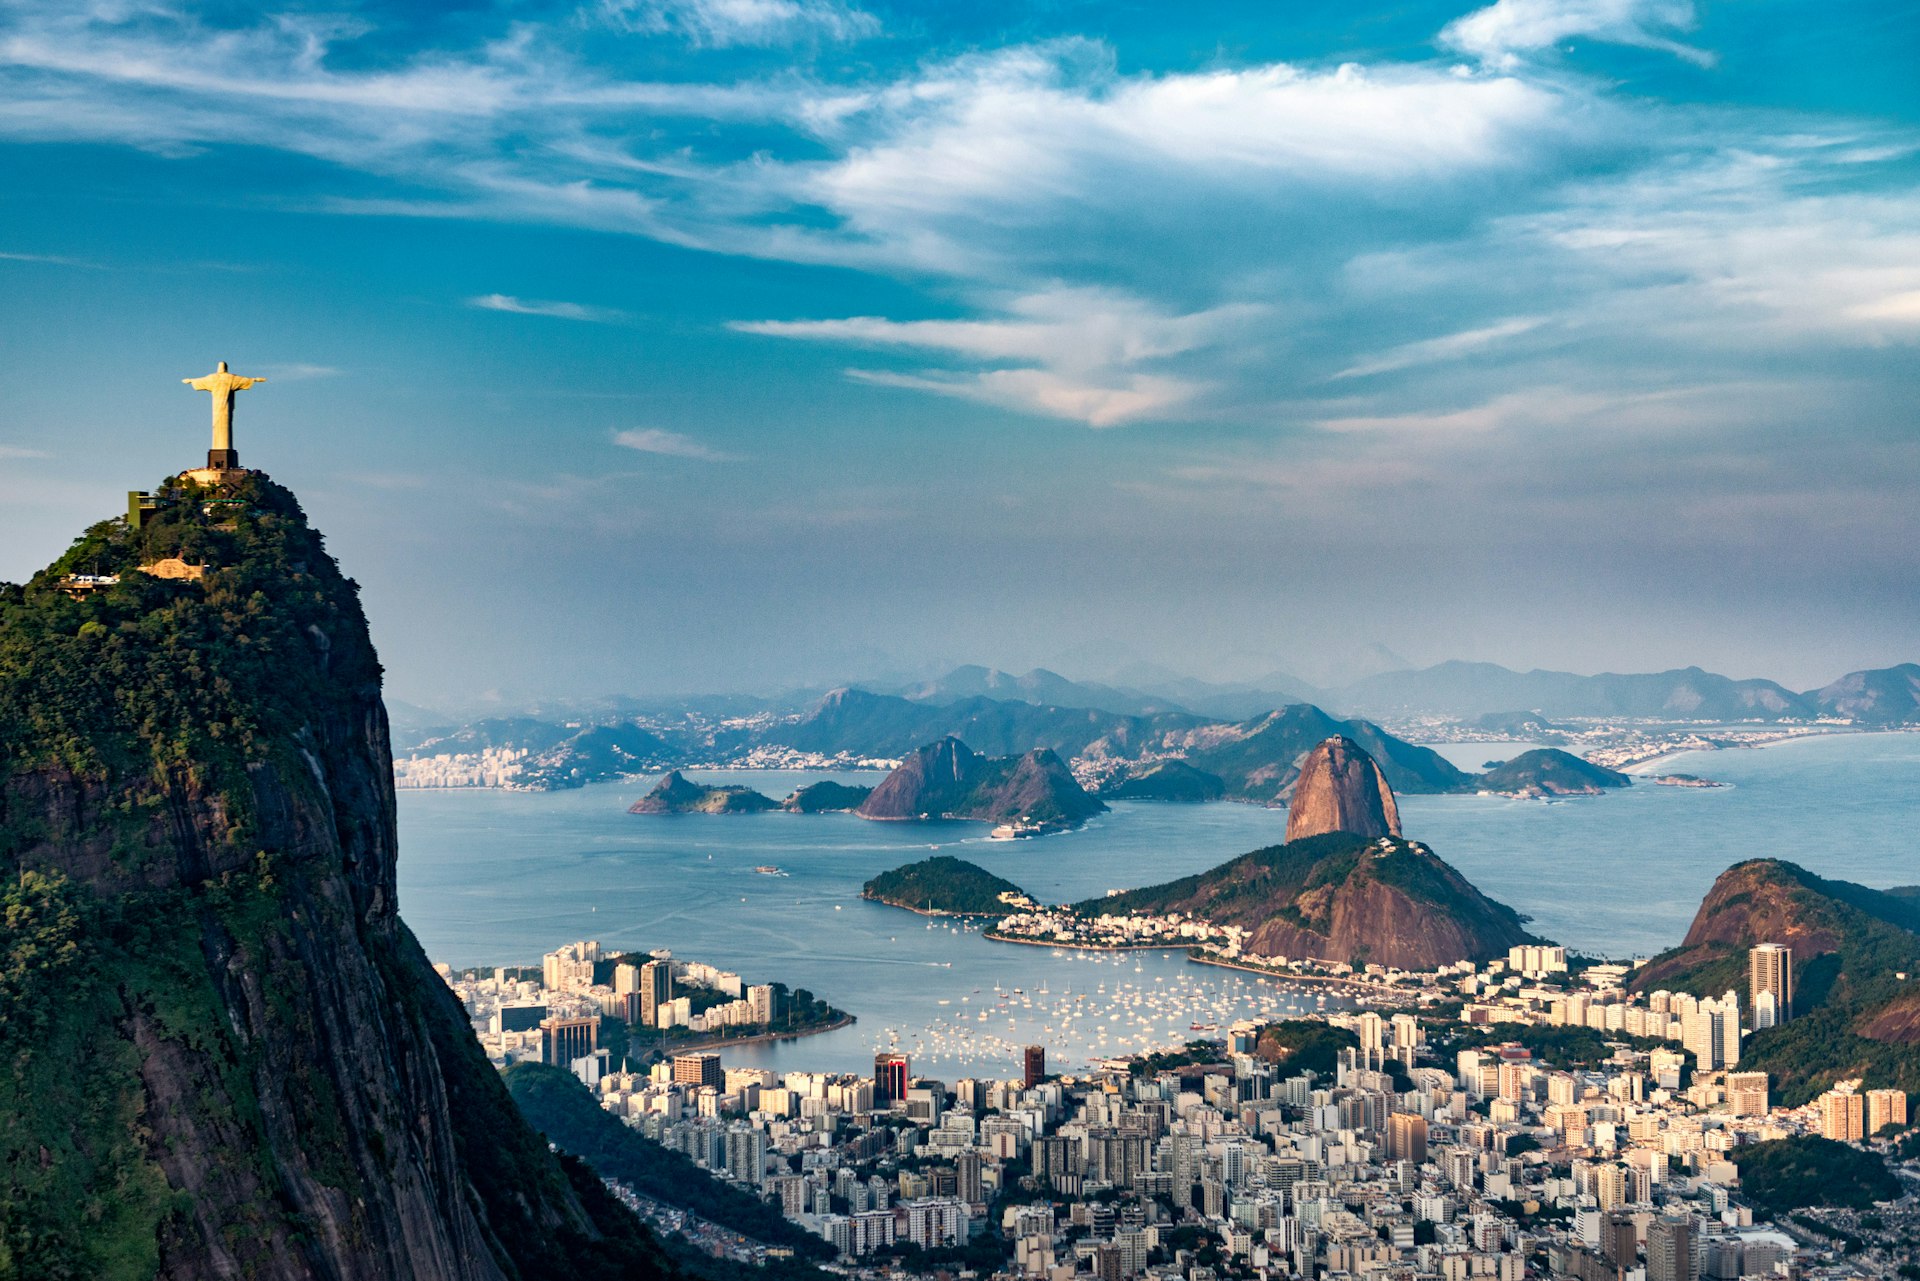 An aerial shot of Rio de Janeiro showing Christ the Redeemer on Corcovado Mountain, Sugarloaf Mountain and Guanabara Bay